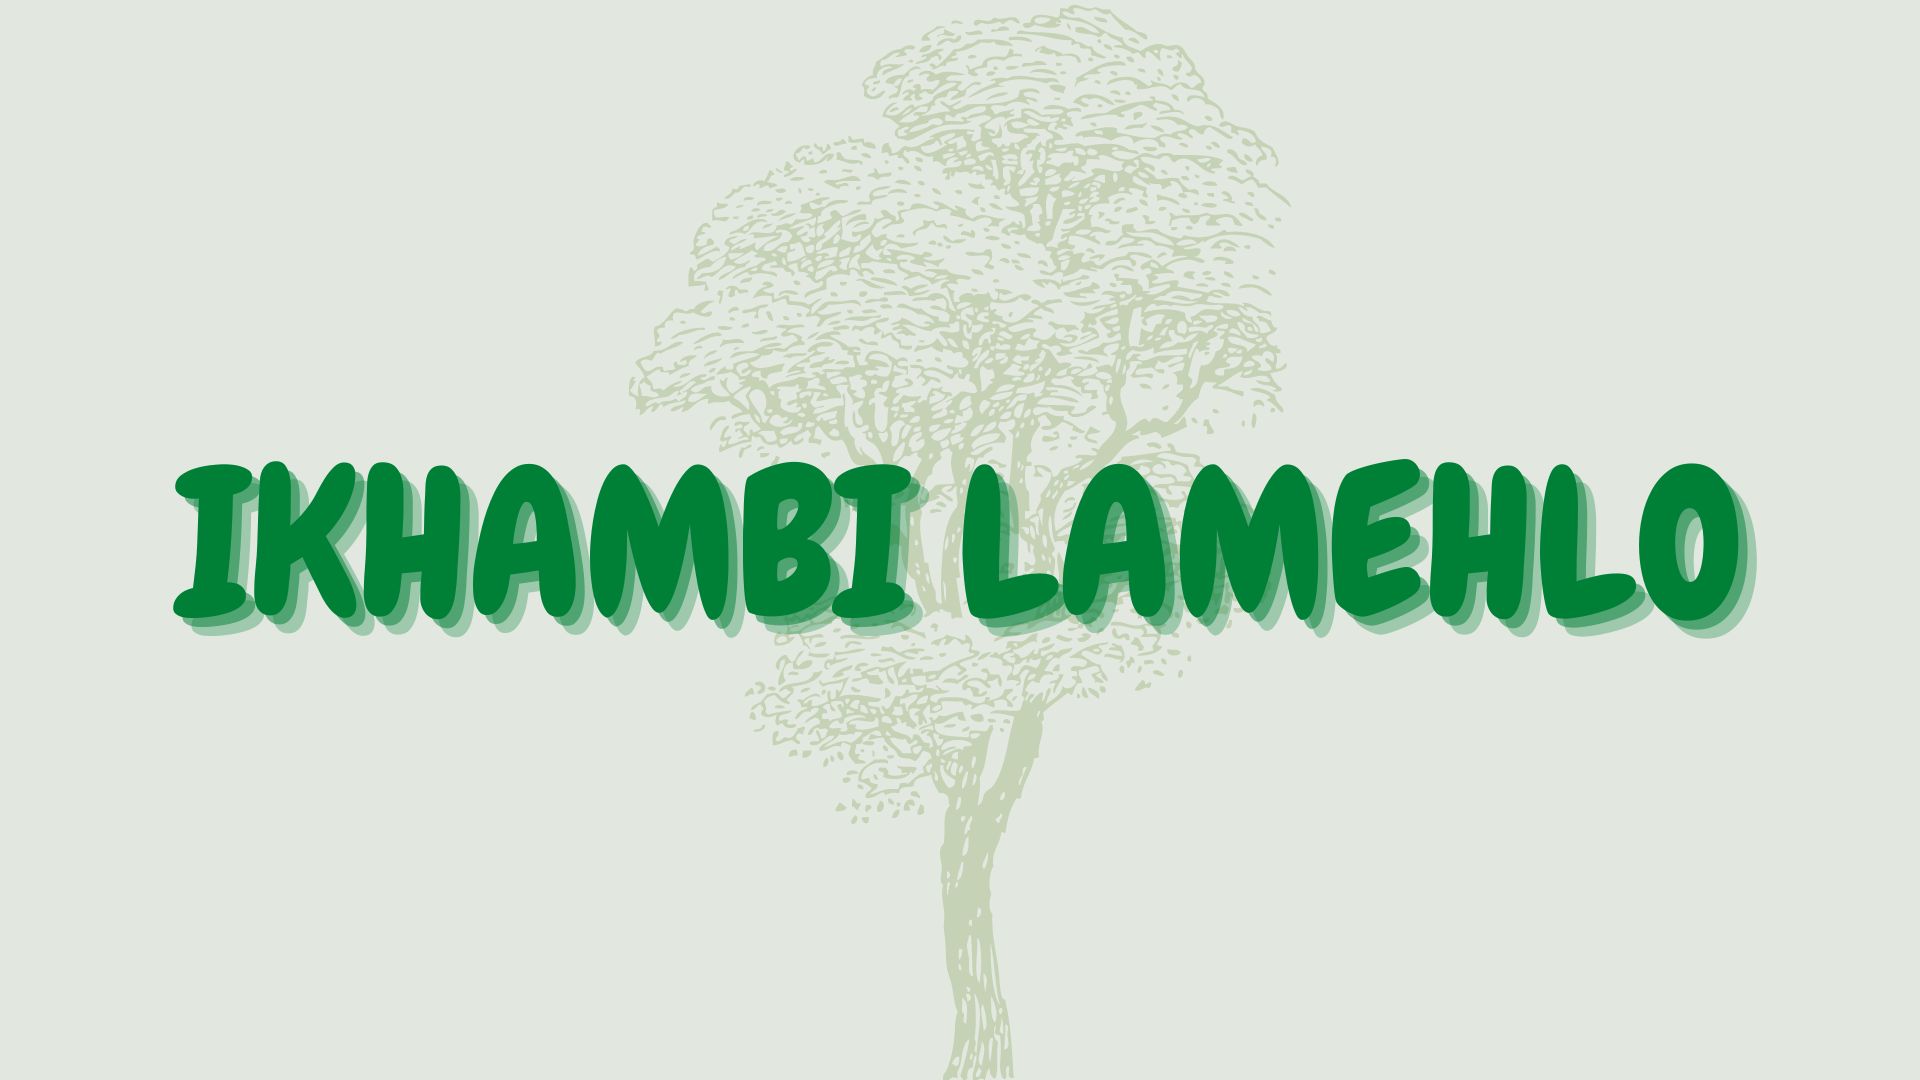 You are currently viewing Ikhambi lamehlo